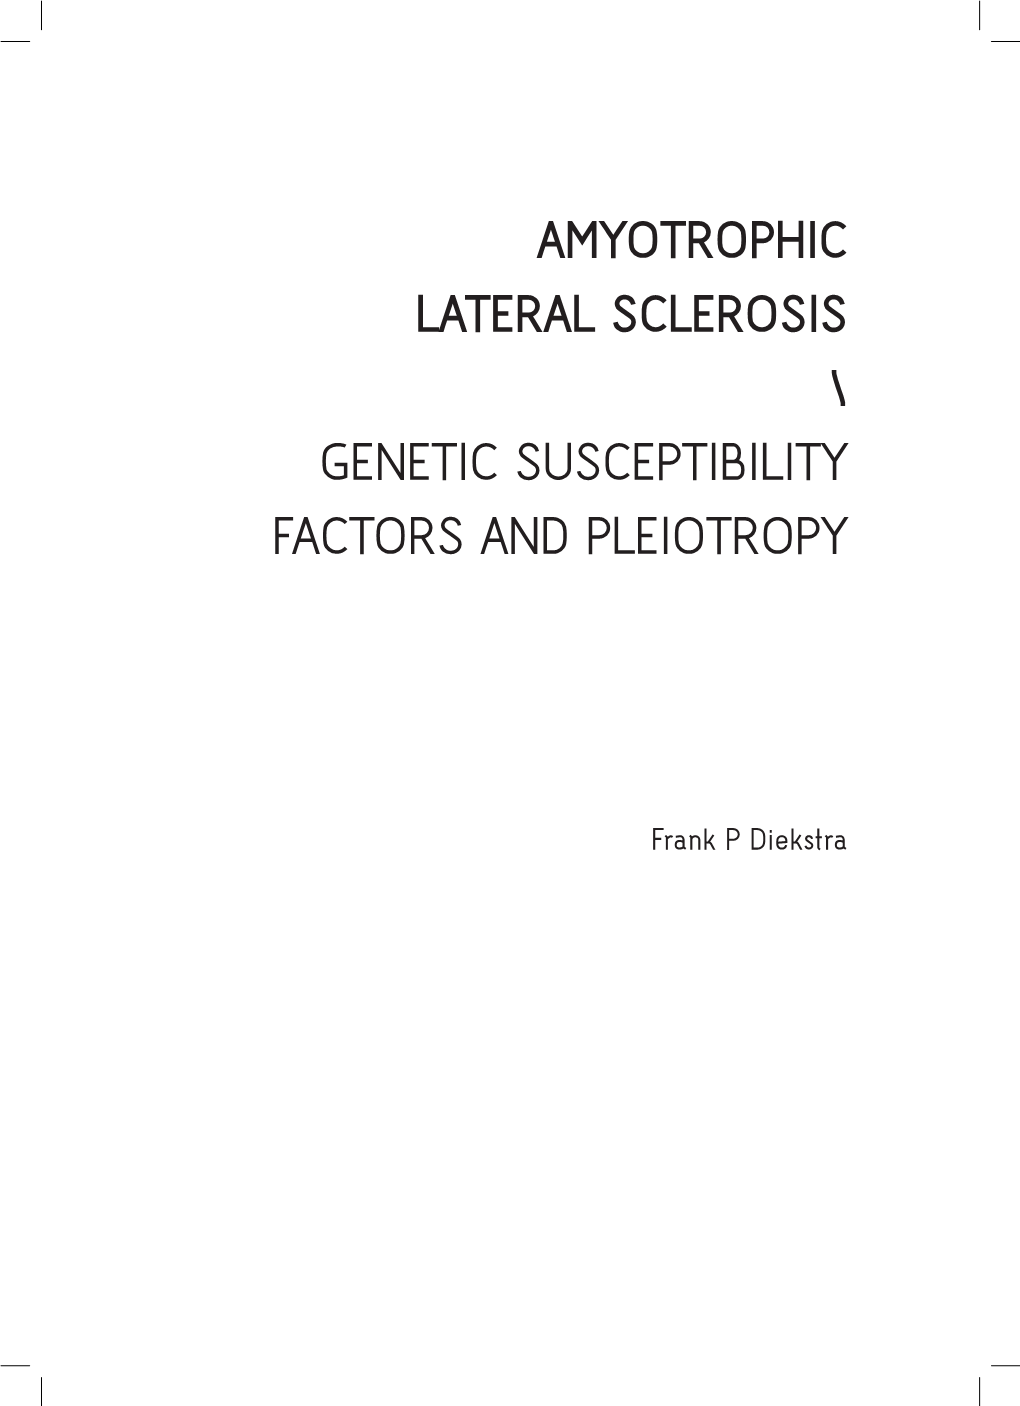 Amyotrophic Lateral Sclerosis \ Genetic Susceptibility Factors and Pleiotropy